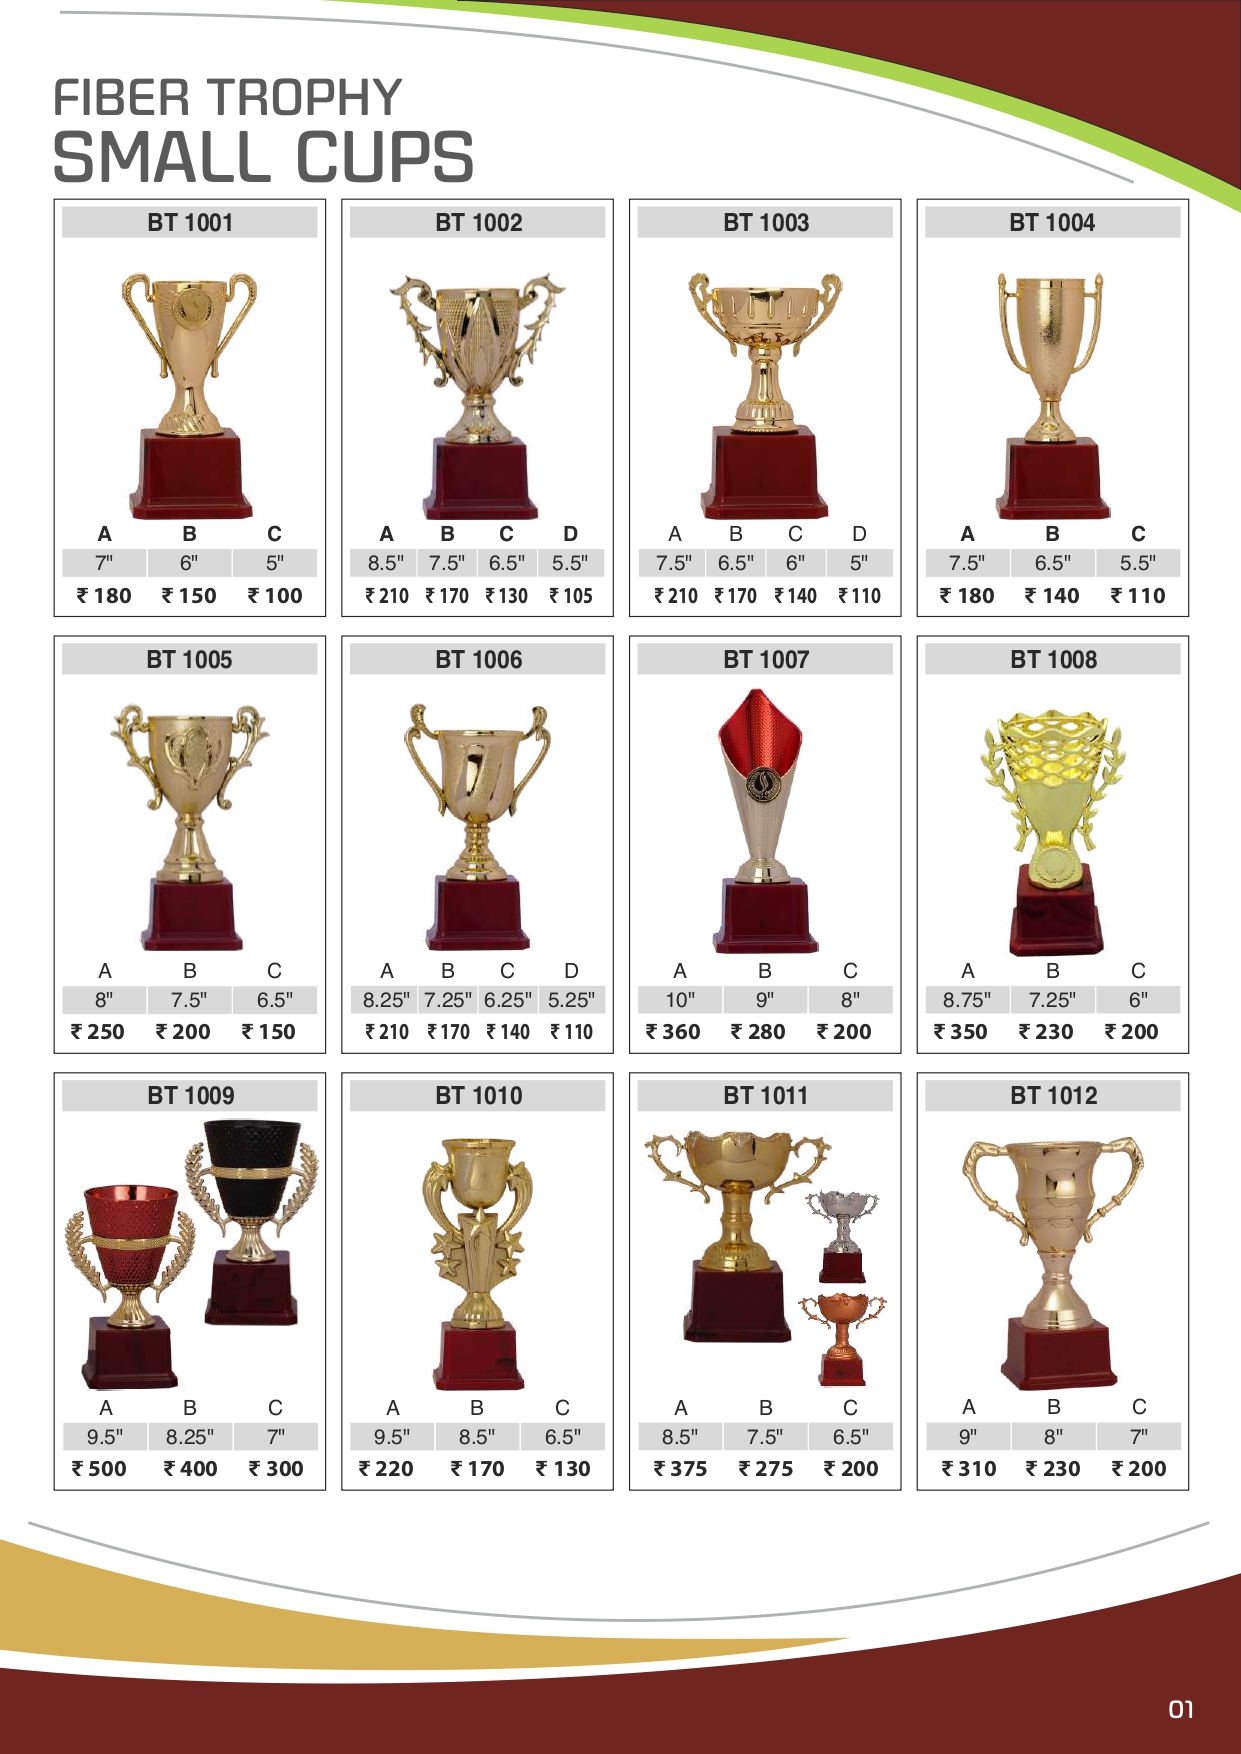 Saga Sports And Trophies - Service - Fiber Trophy Small Cups